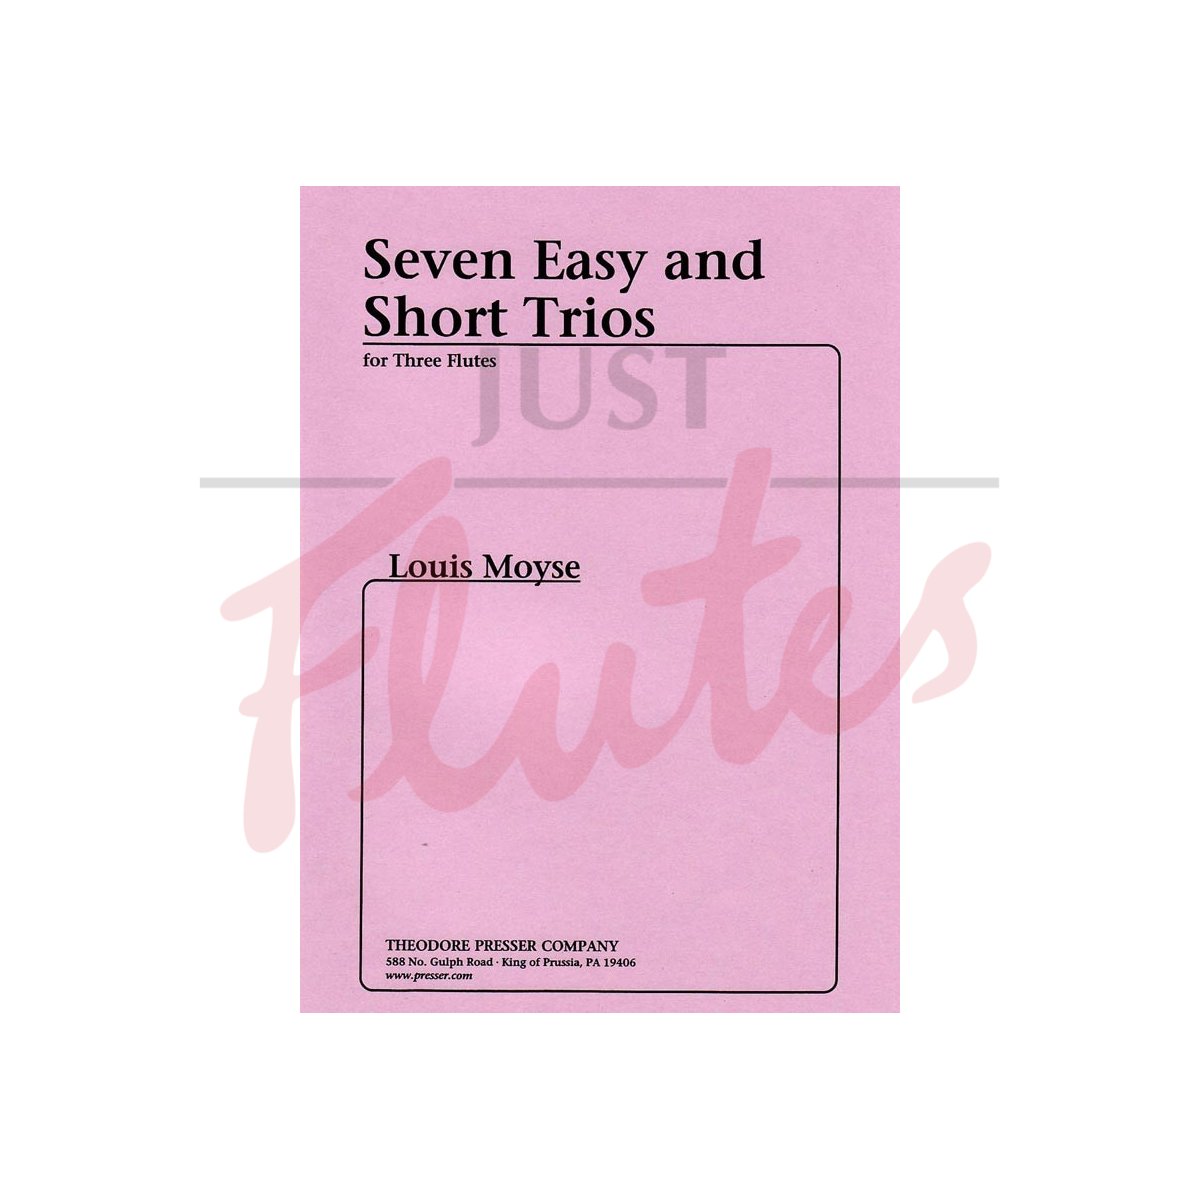 Seven Easy and Short Trios for Three Flutes